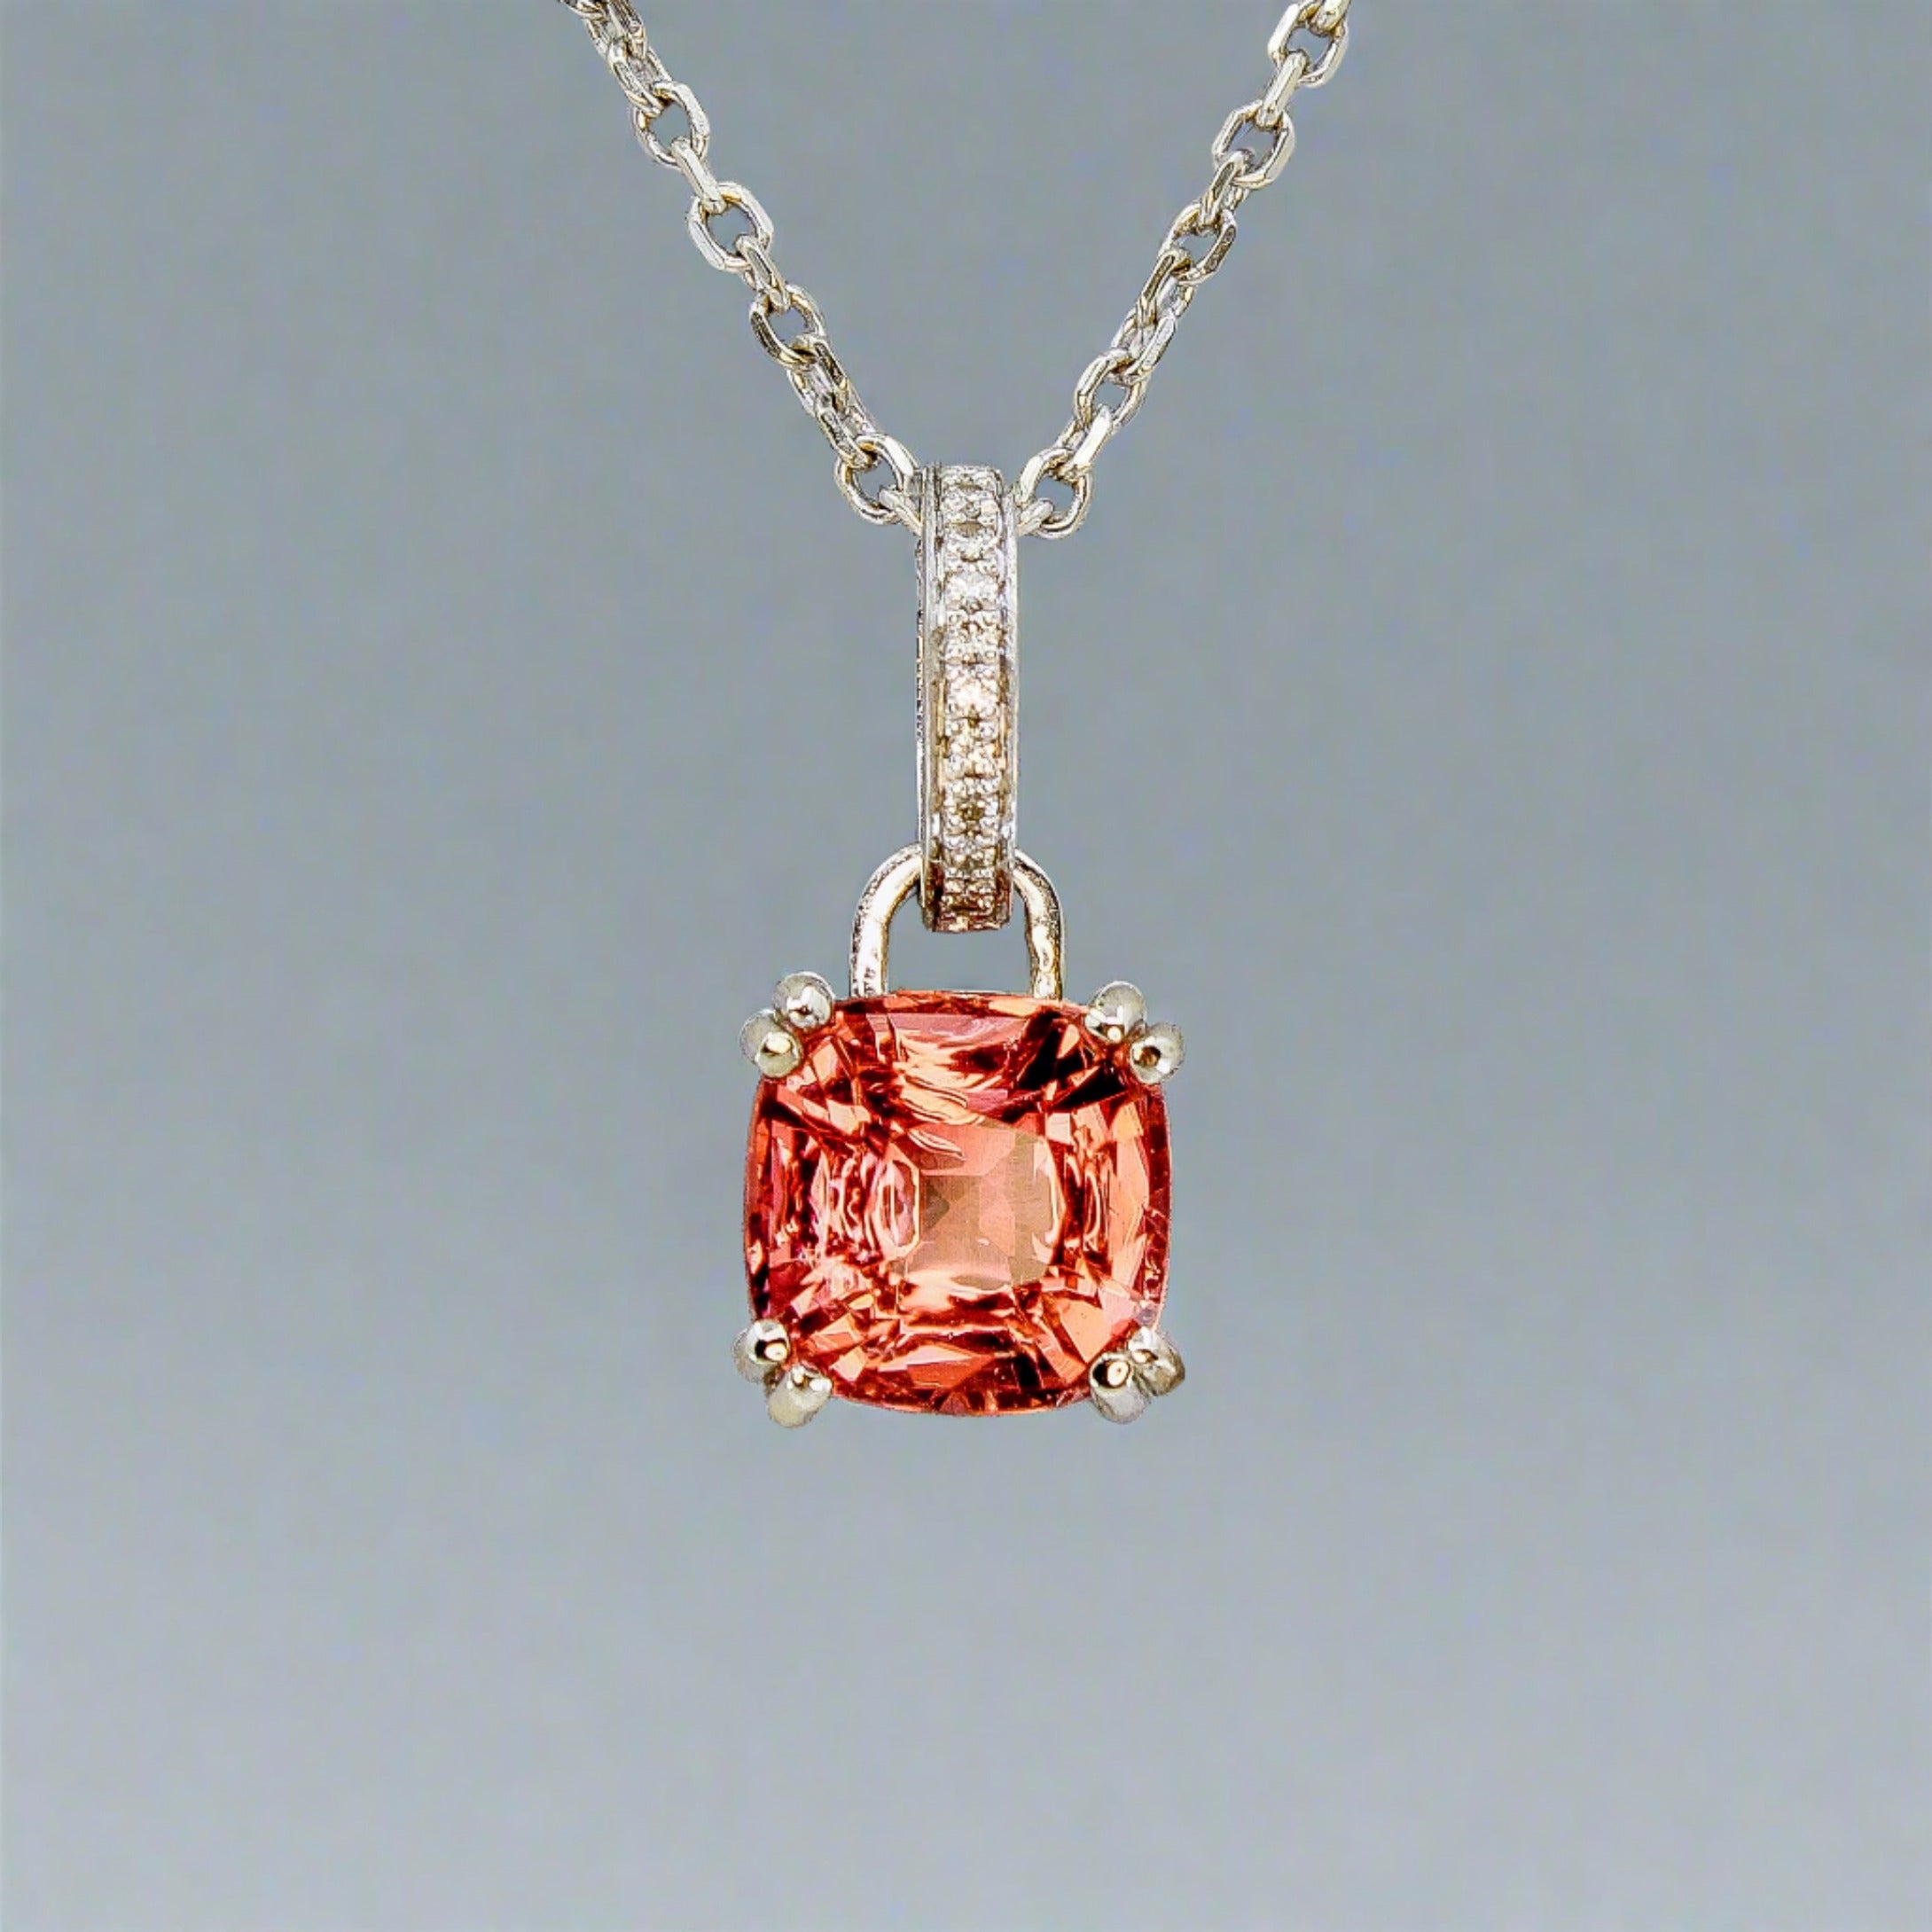 Pink tourmaline pendant in 14k white gold with diamond accent on the bail